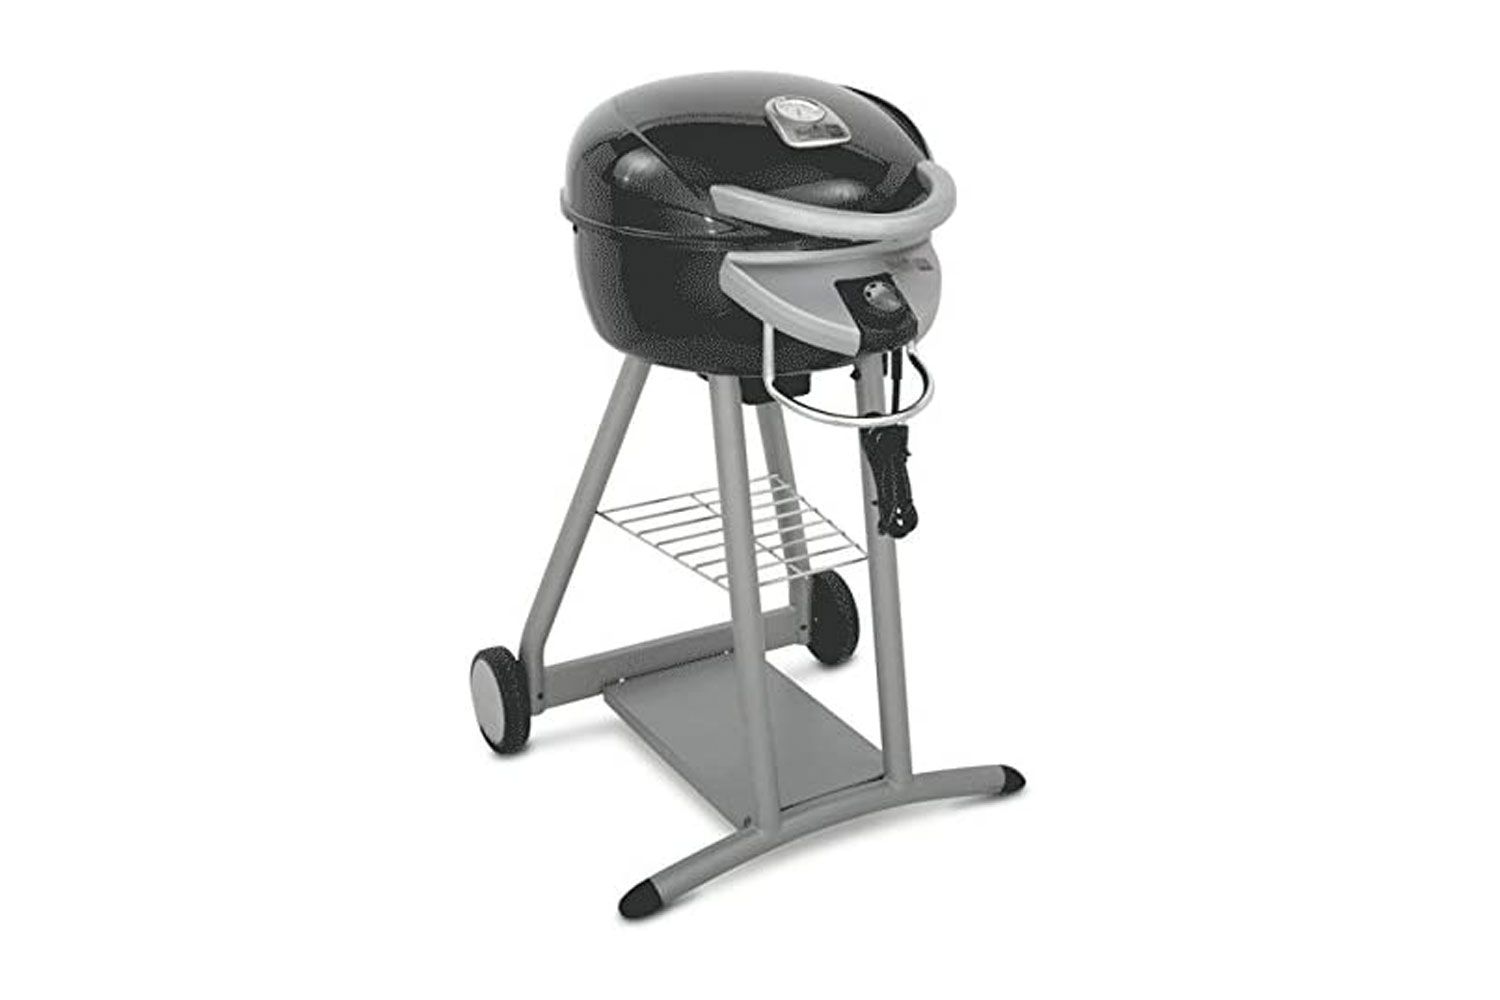 Char-Broil Patio Bistro Infrared Electric Grill Model # 10601578